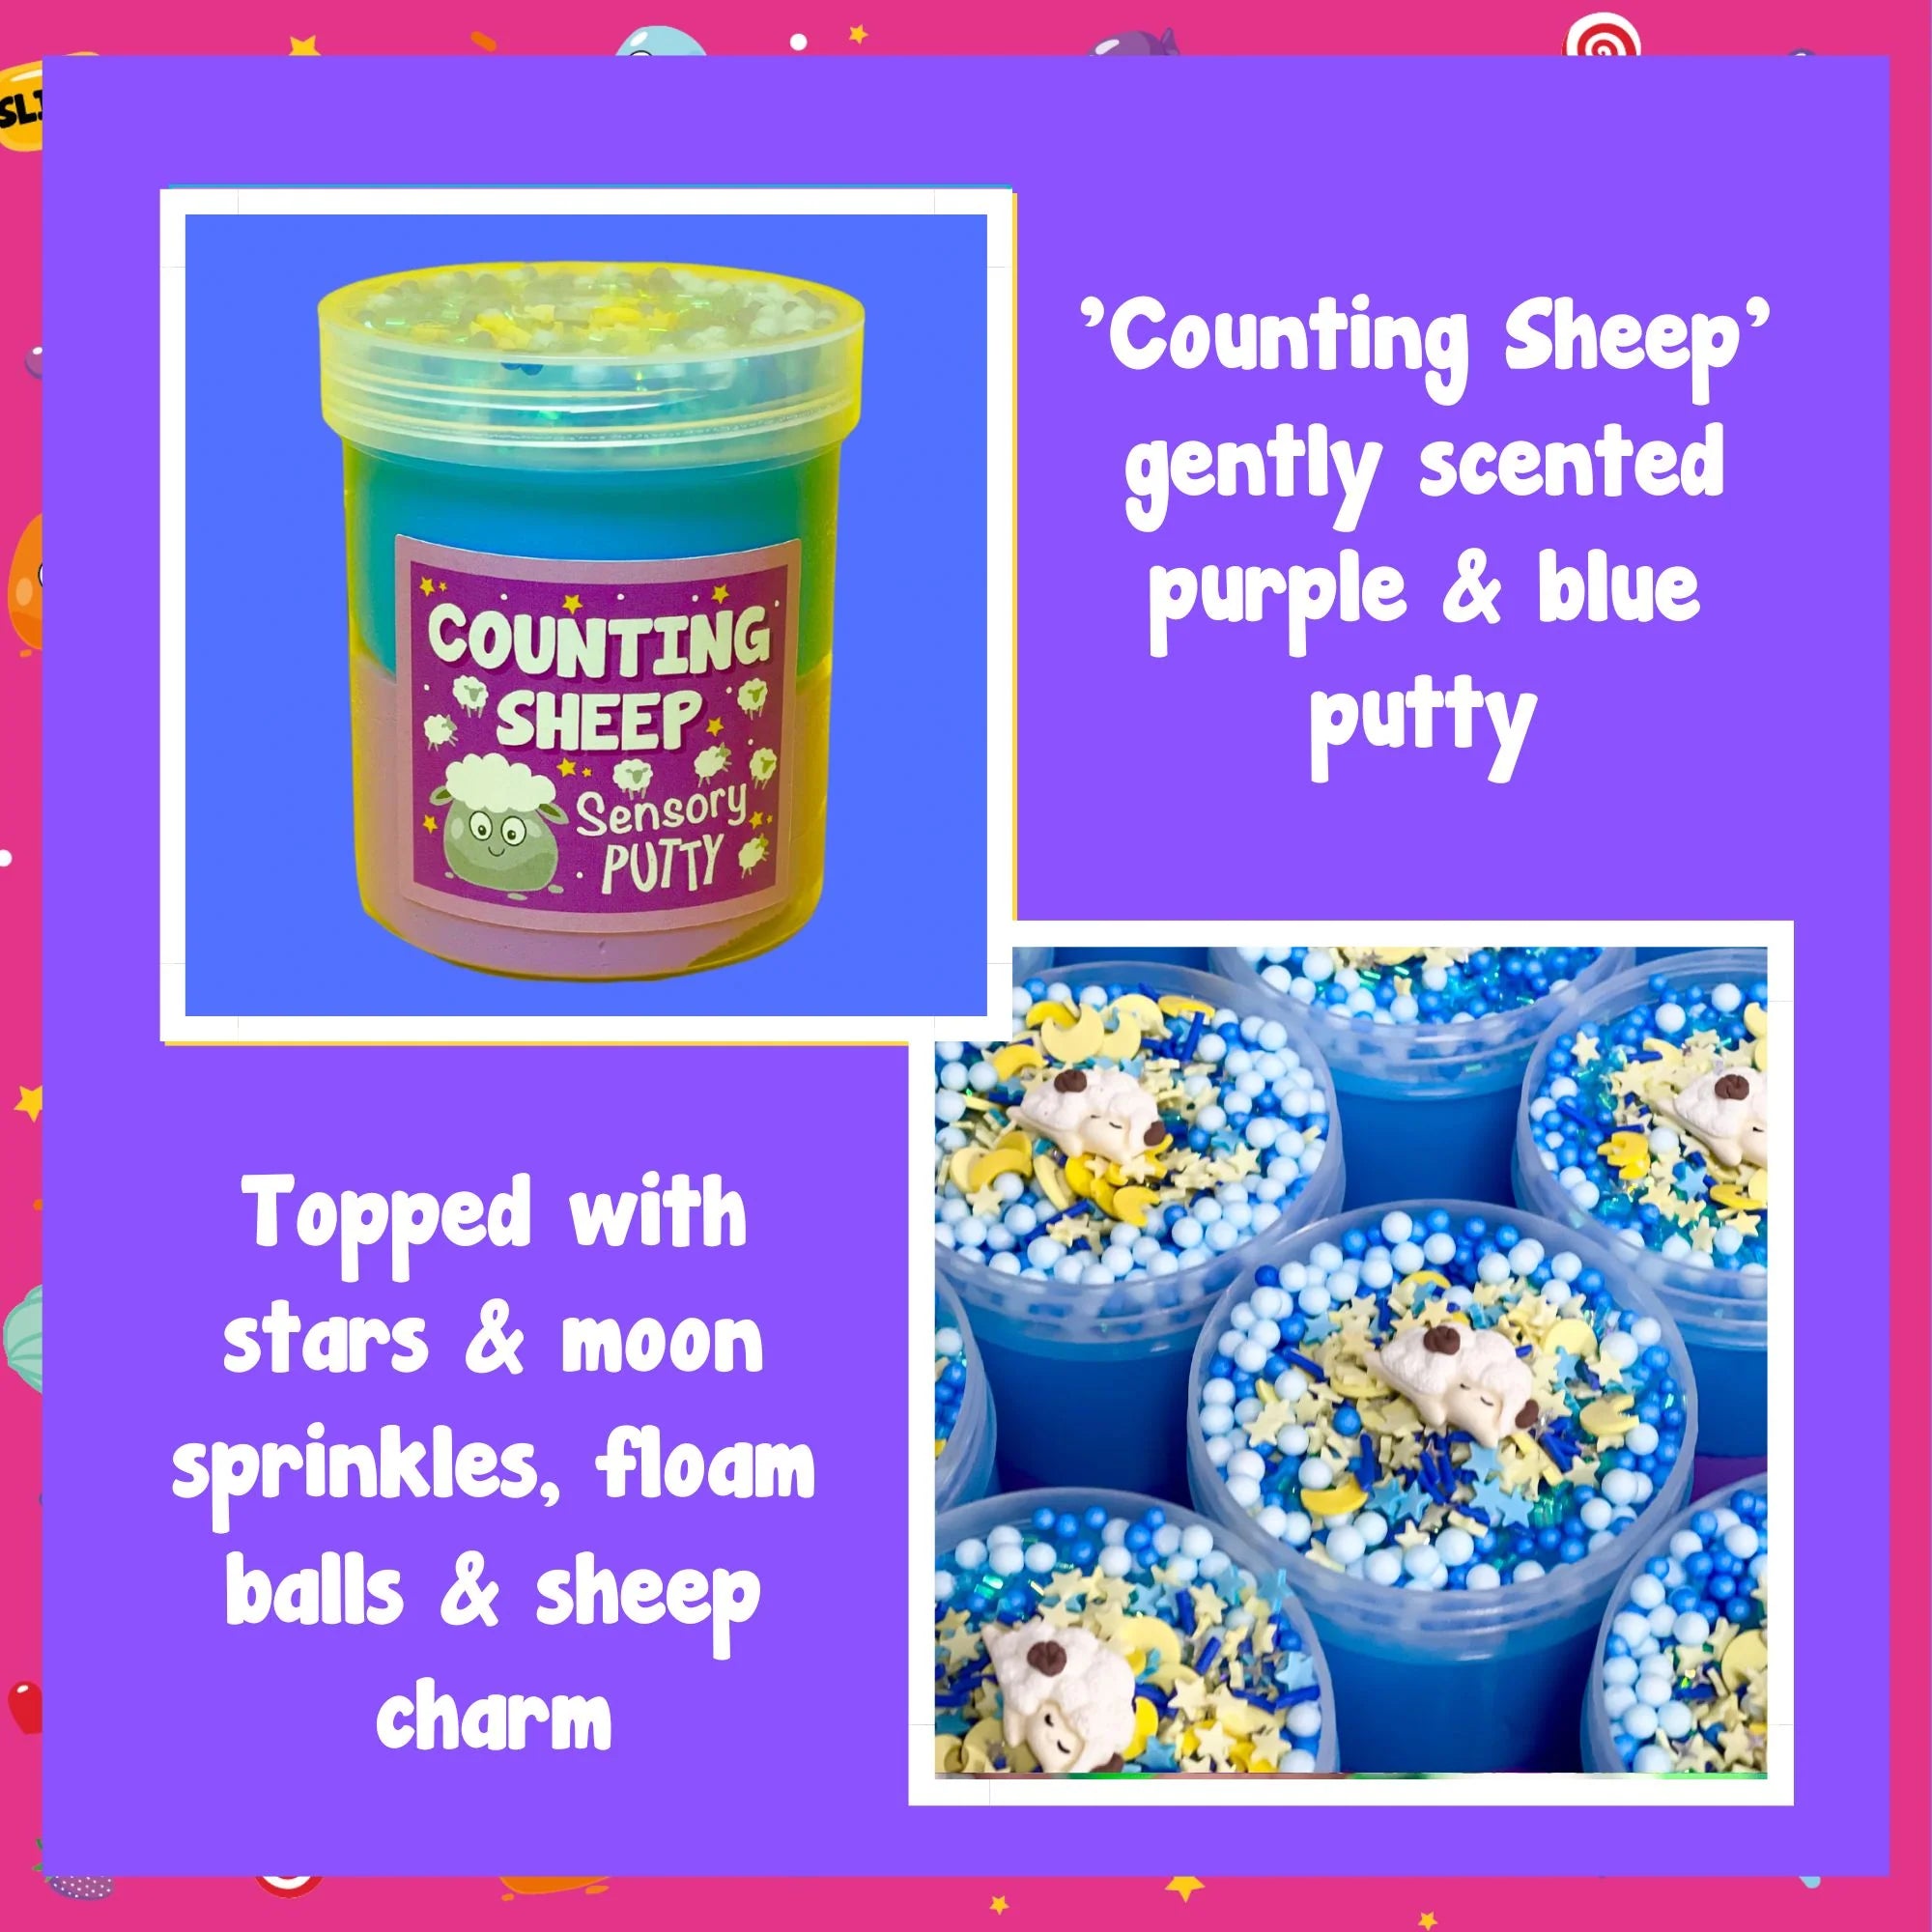 Slime Party Counting Sheep